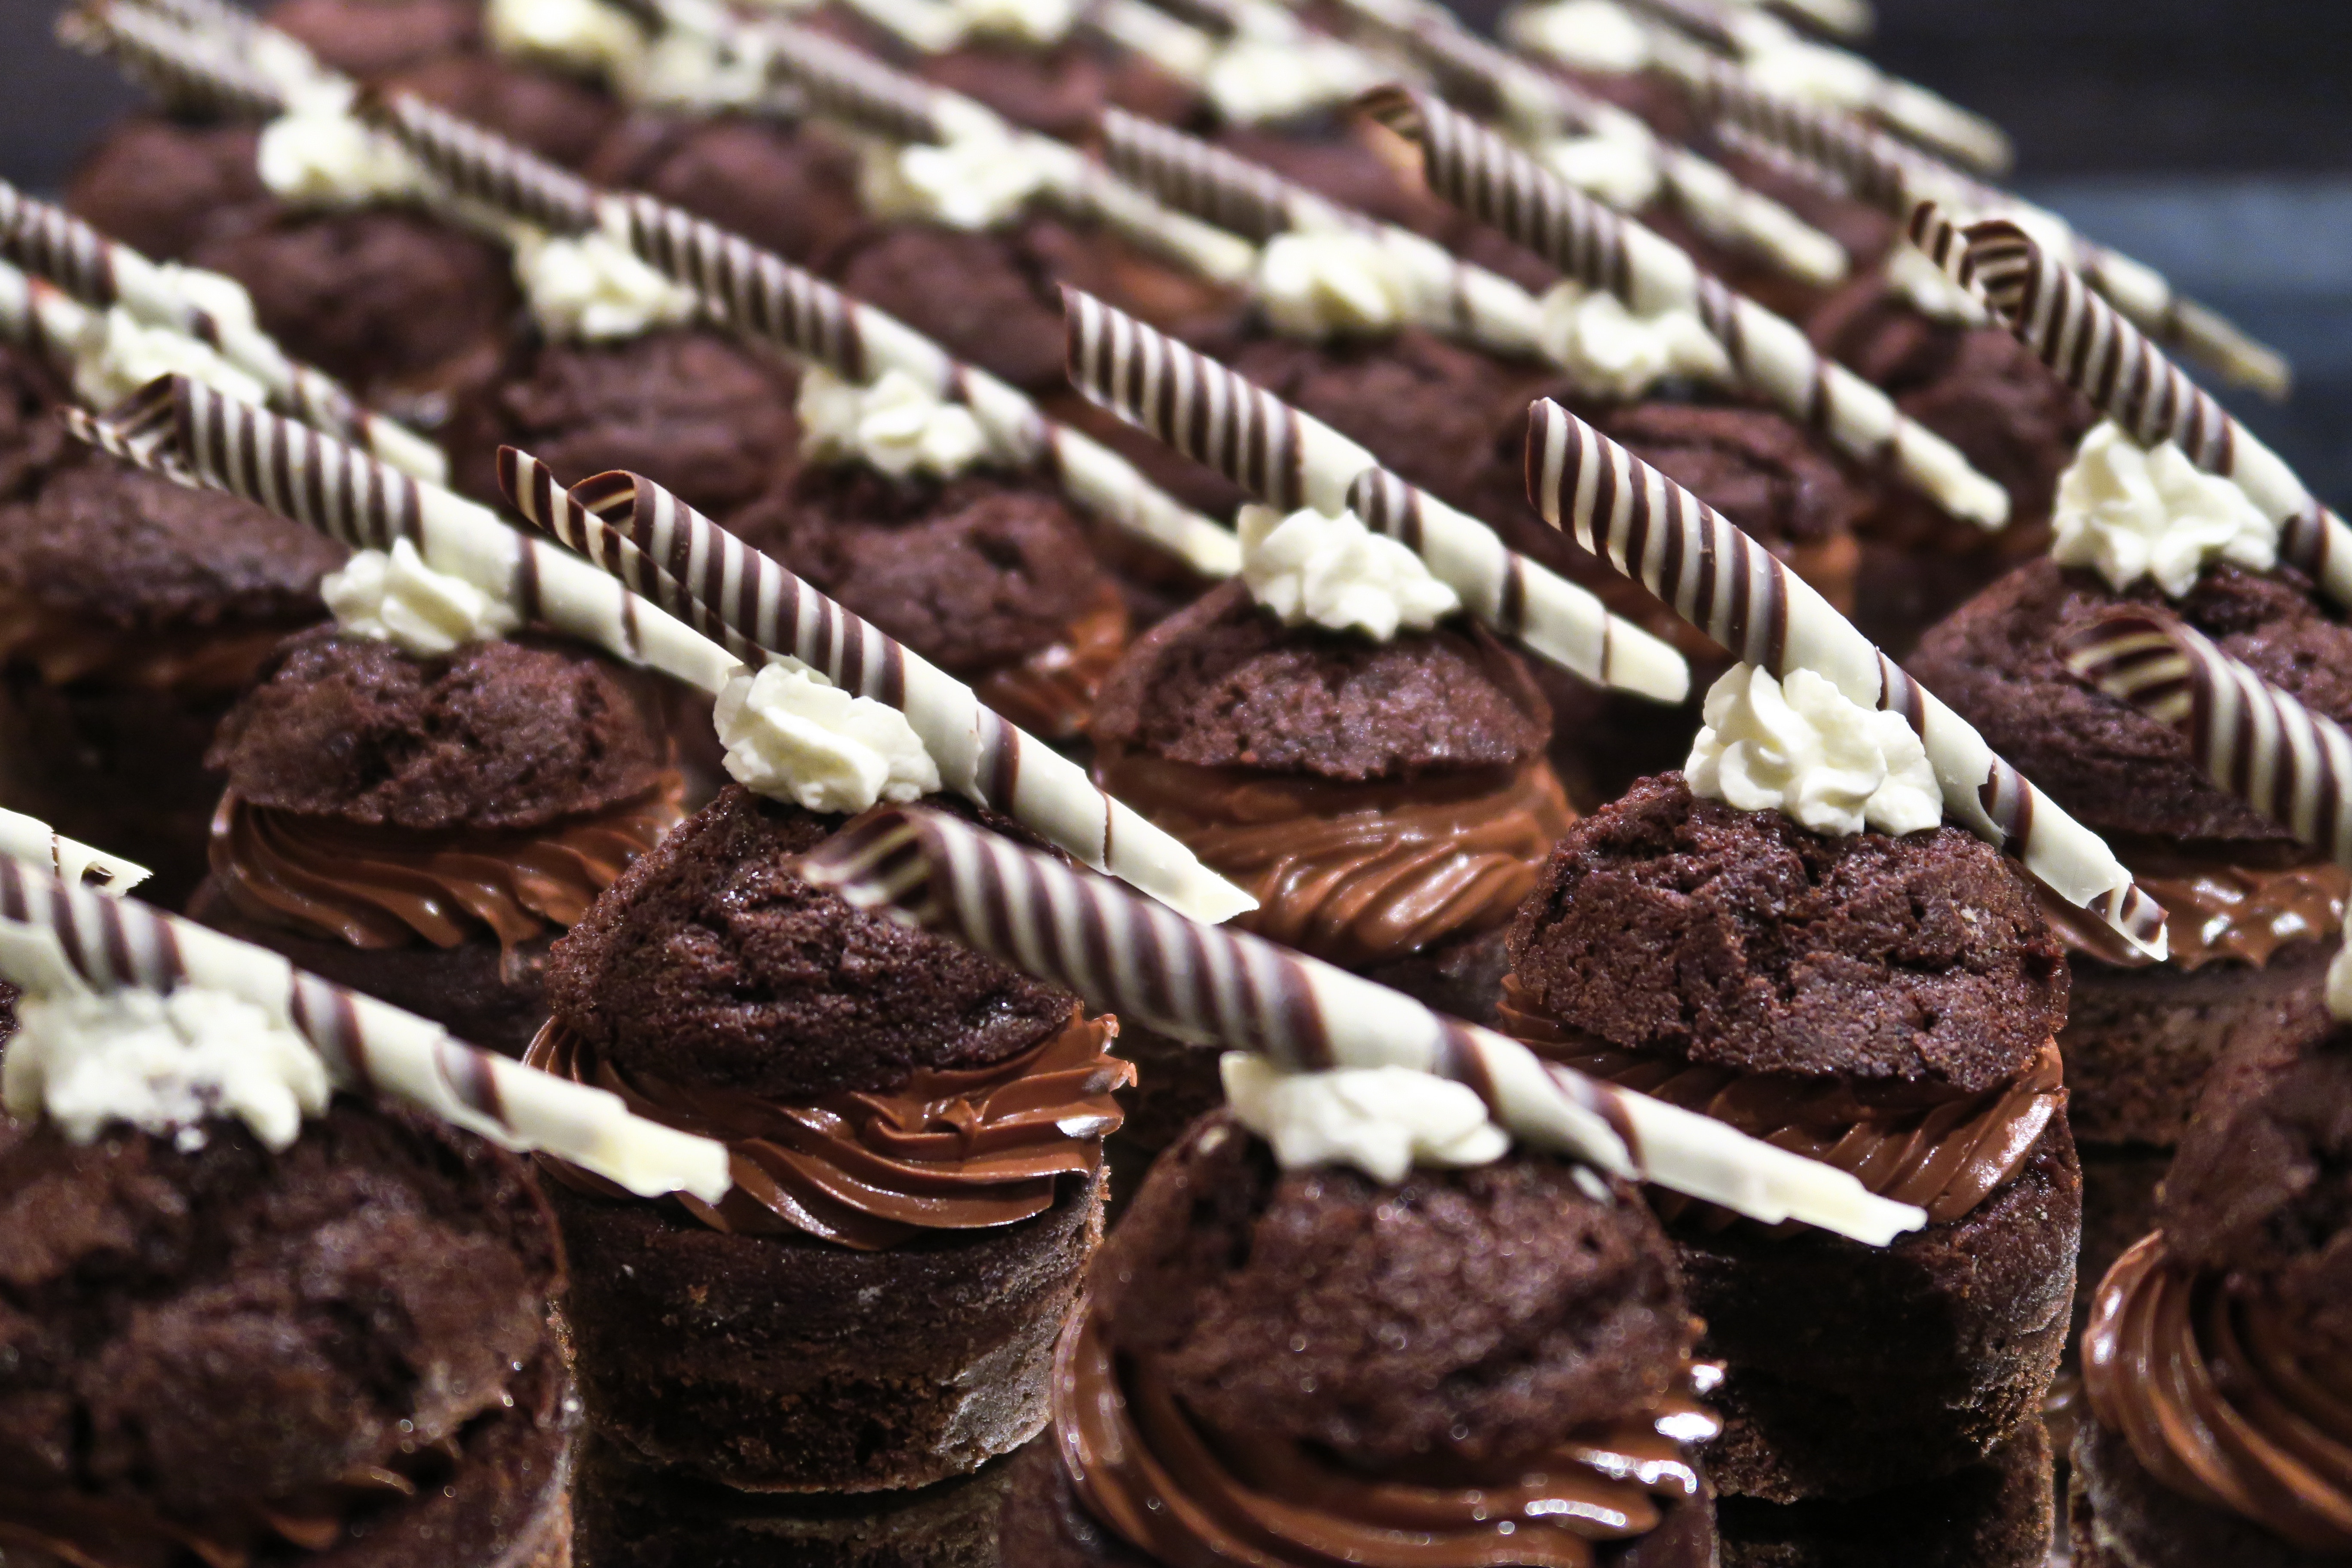 UHD wallpaper desert, food, bakery products, cupcakes